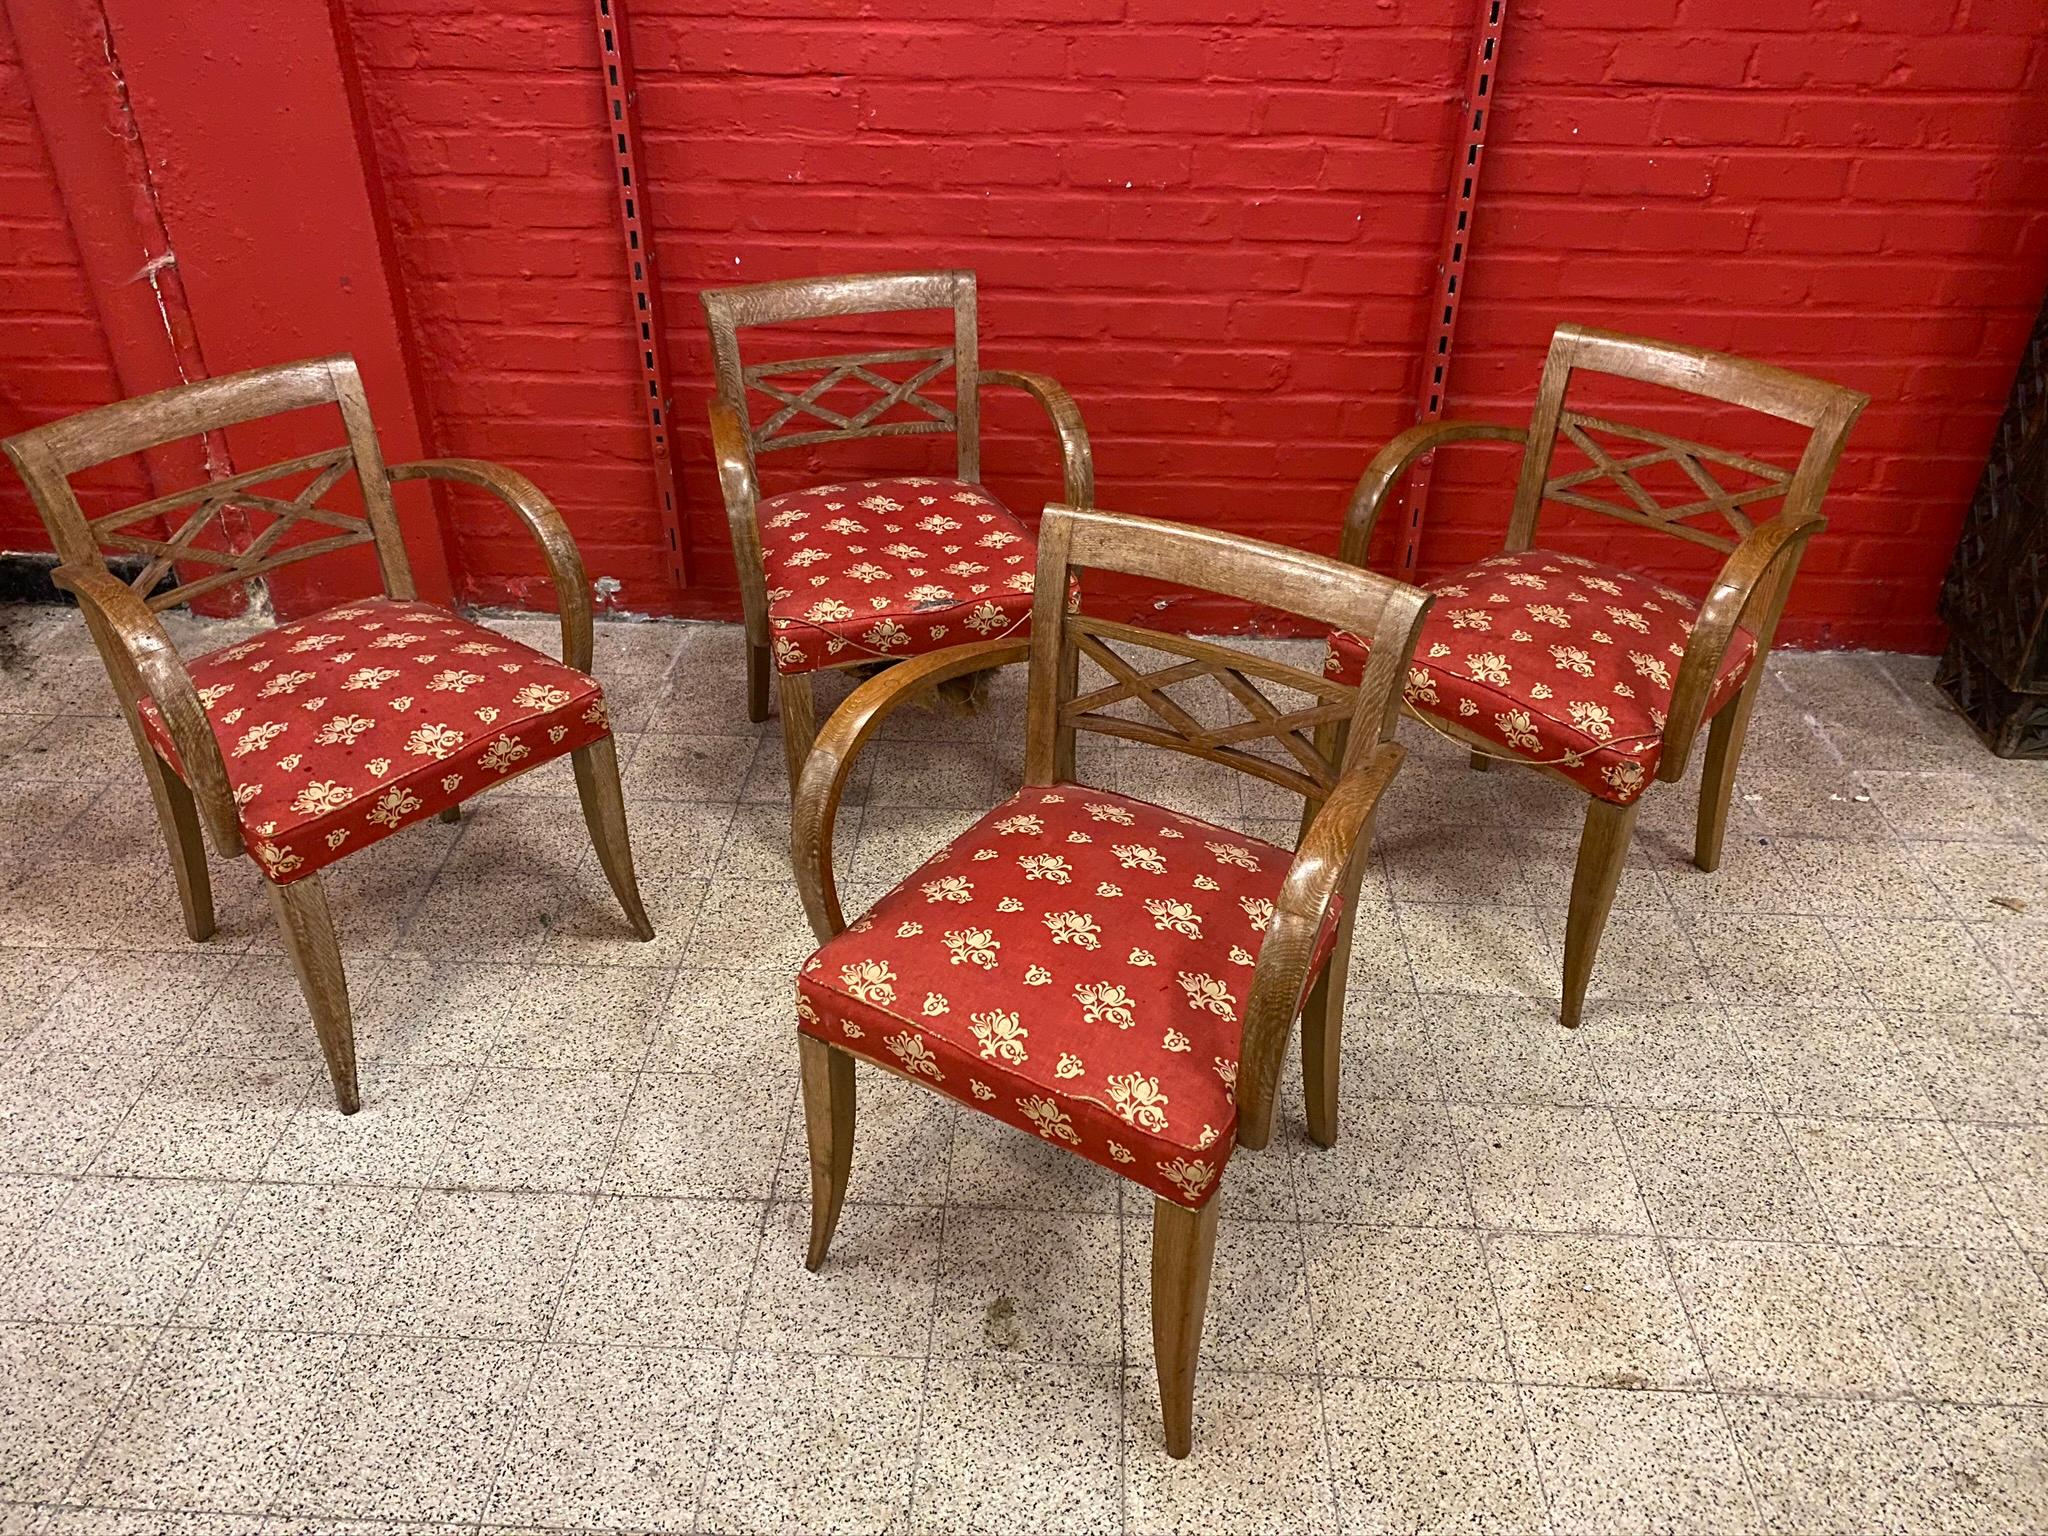 4 Art Deco Armchairs, circa 1930-1940 In Good Condition For Sale In Saint-Ouen, FR